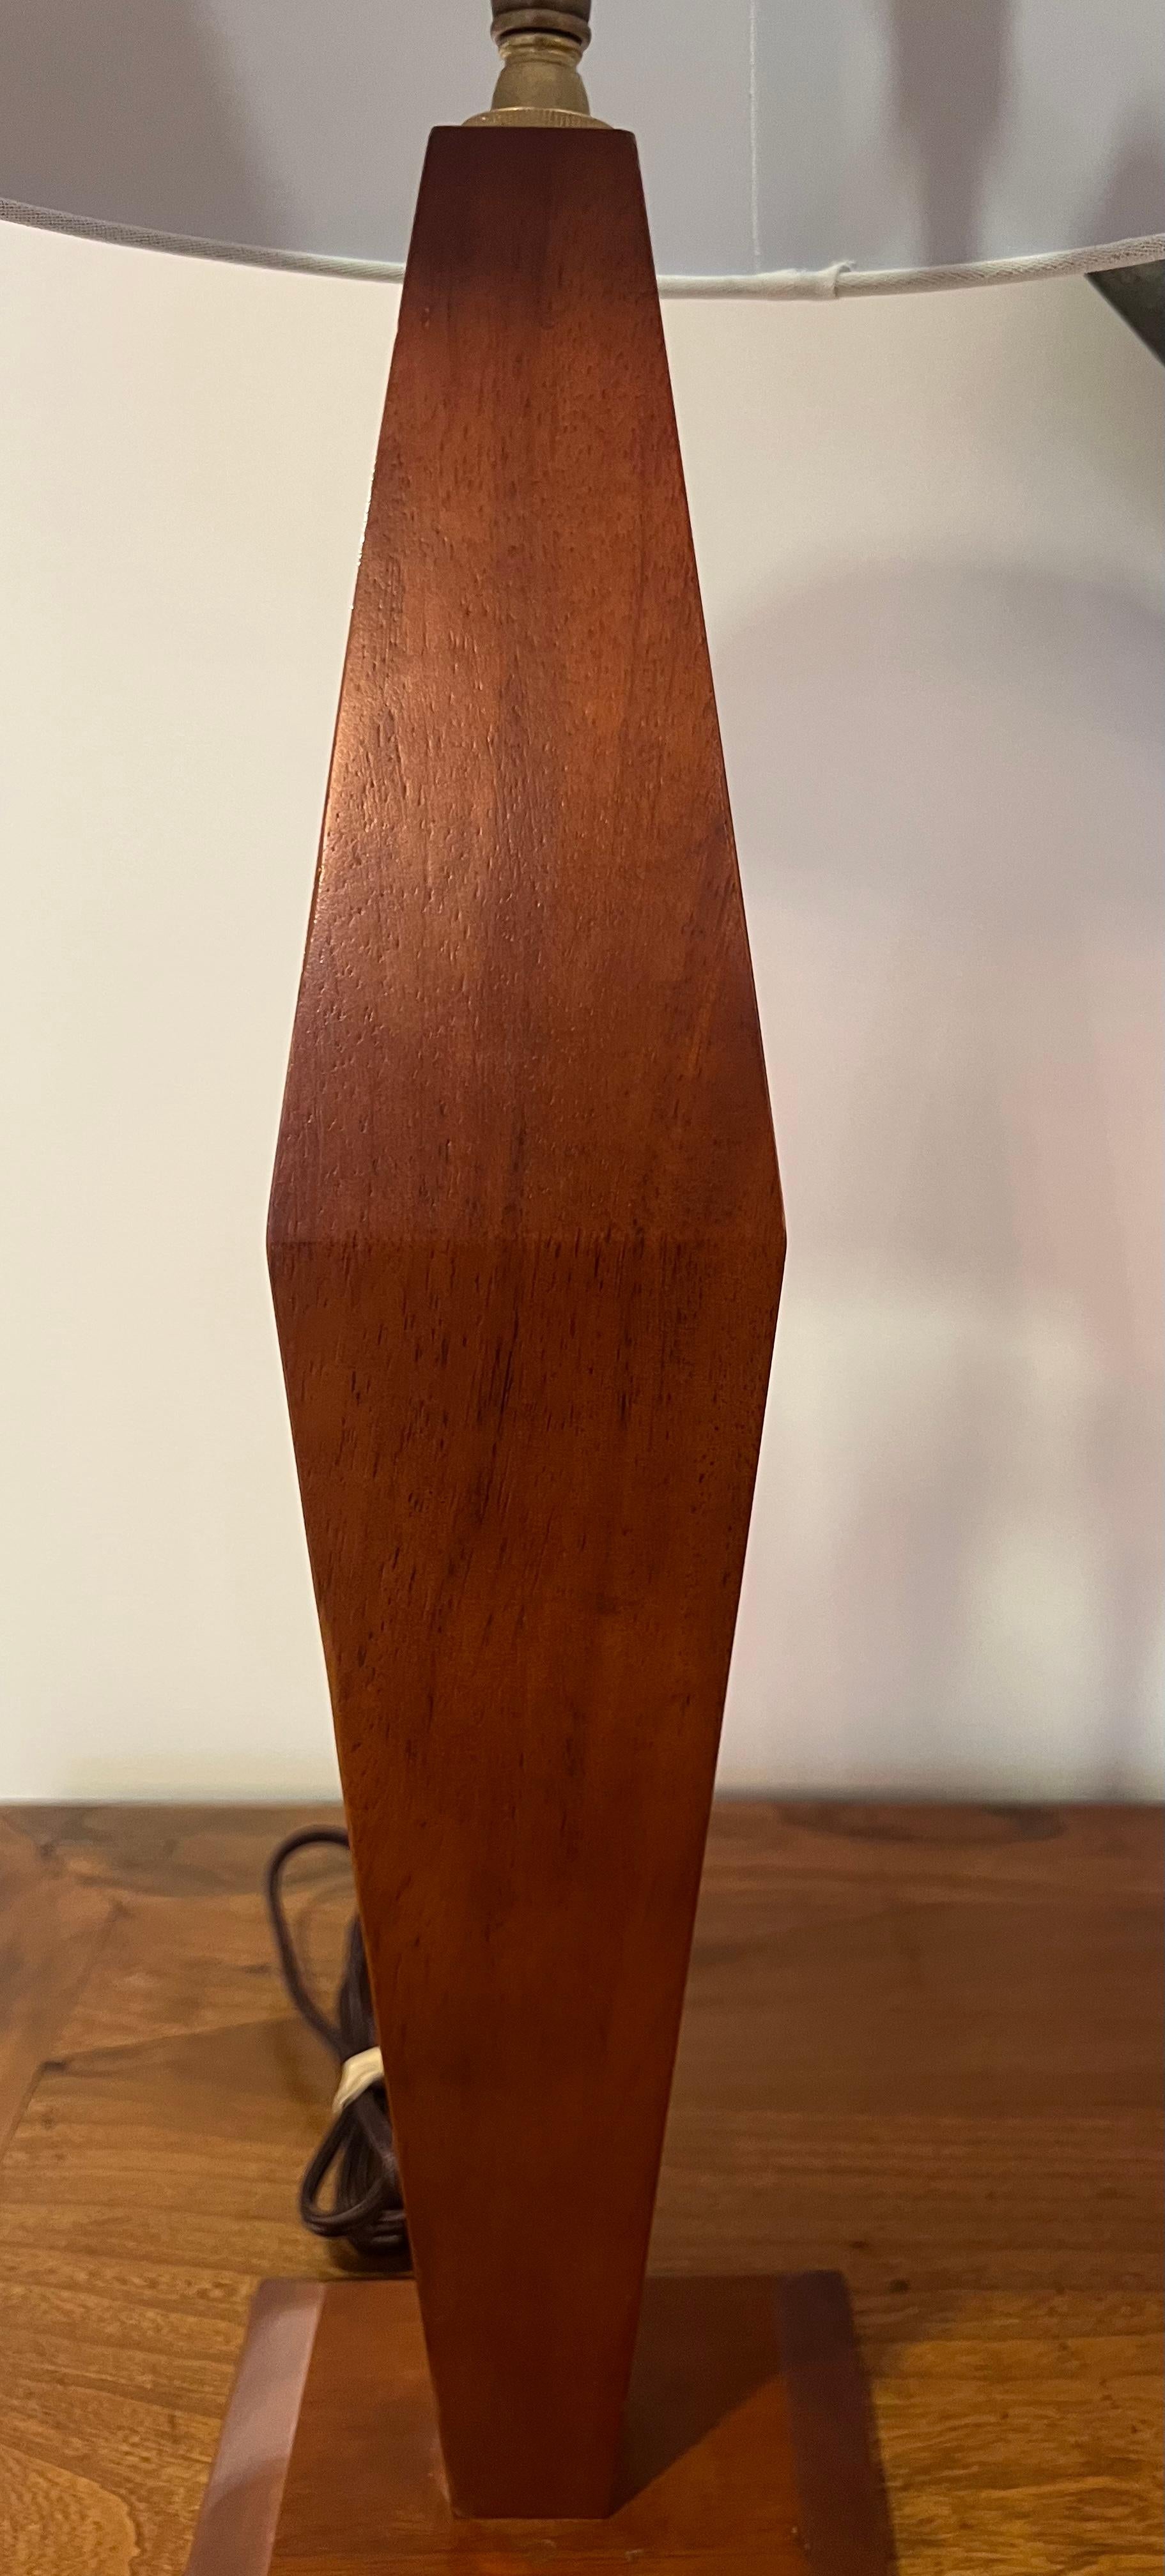 Pair of American Art Deco 1940s Wood Table Lamps For Sale 5